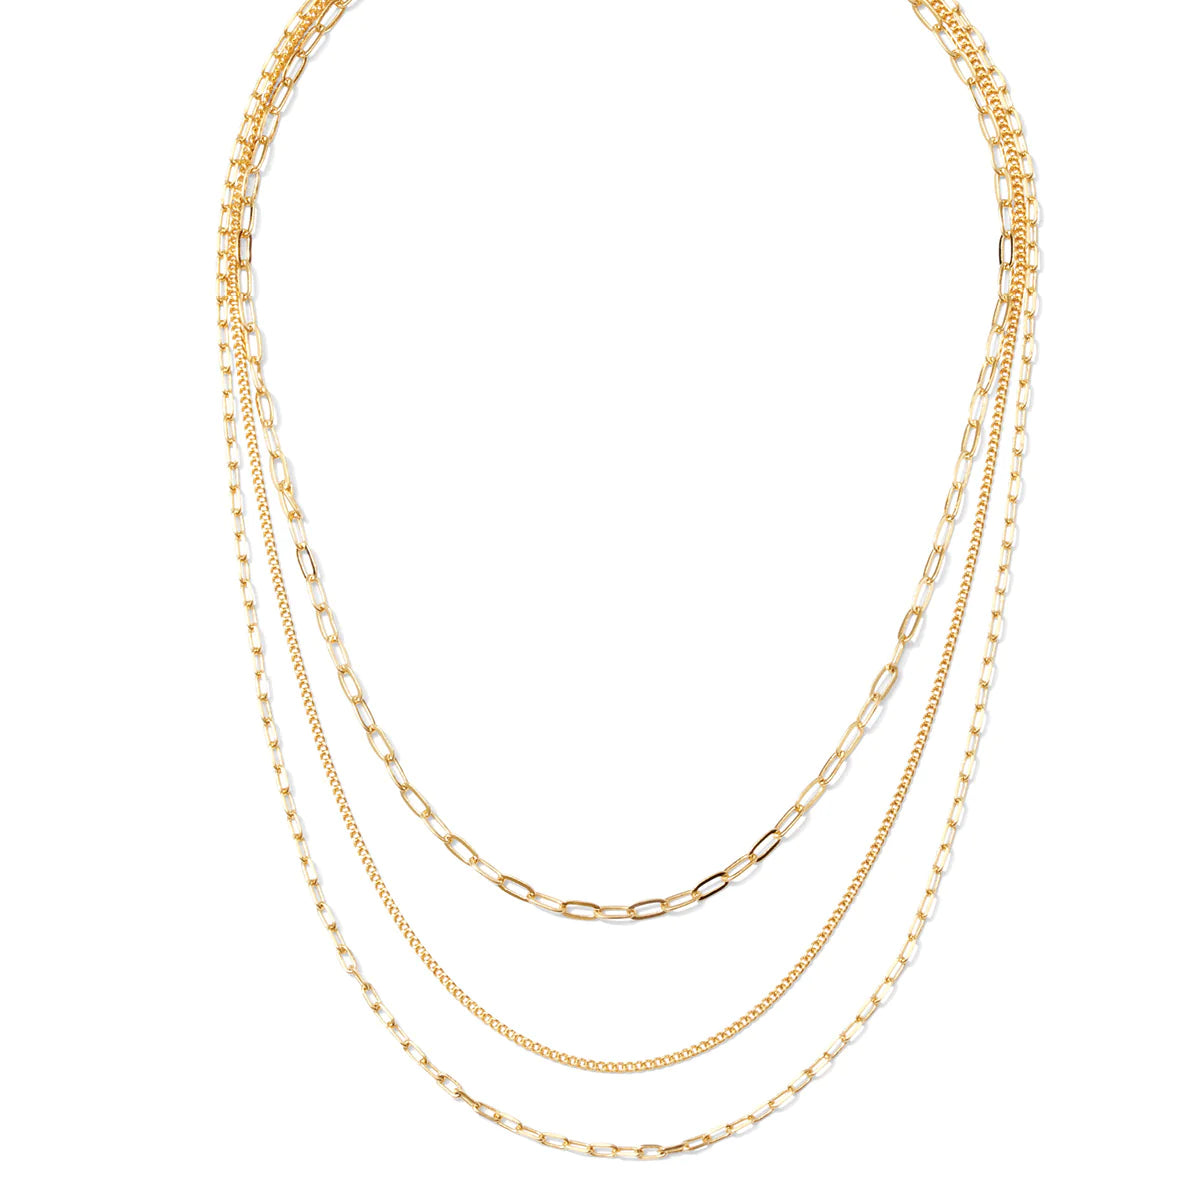 Triple Layer Delicate Chain Necklace (Gold or Silver)